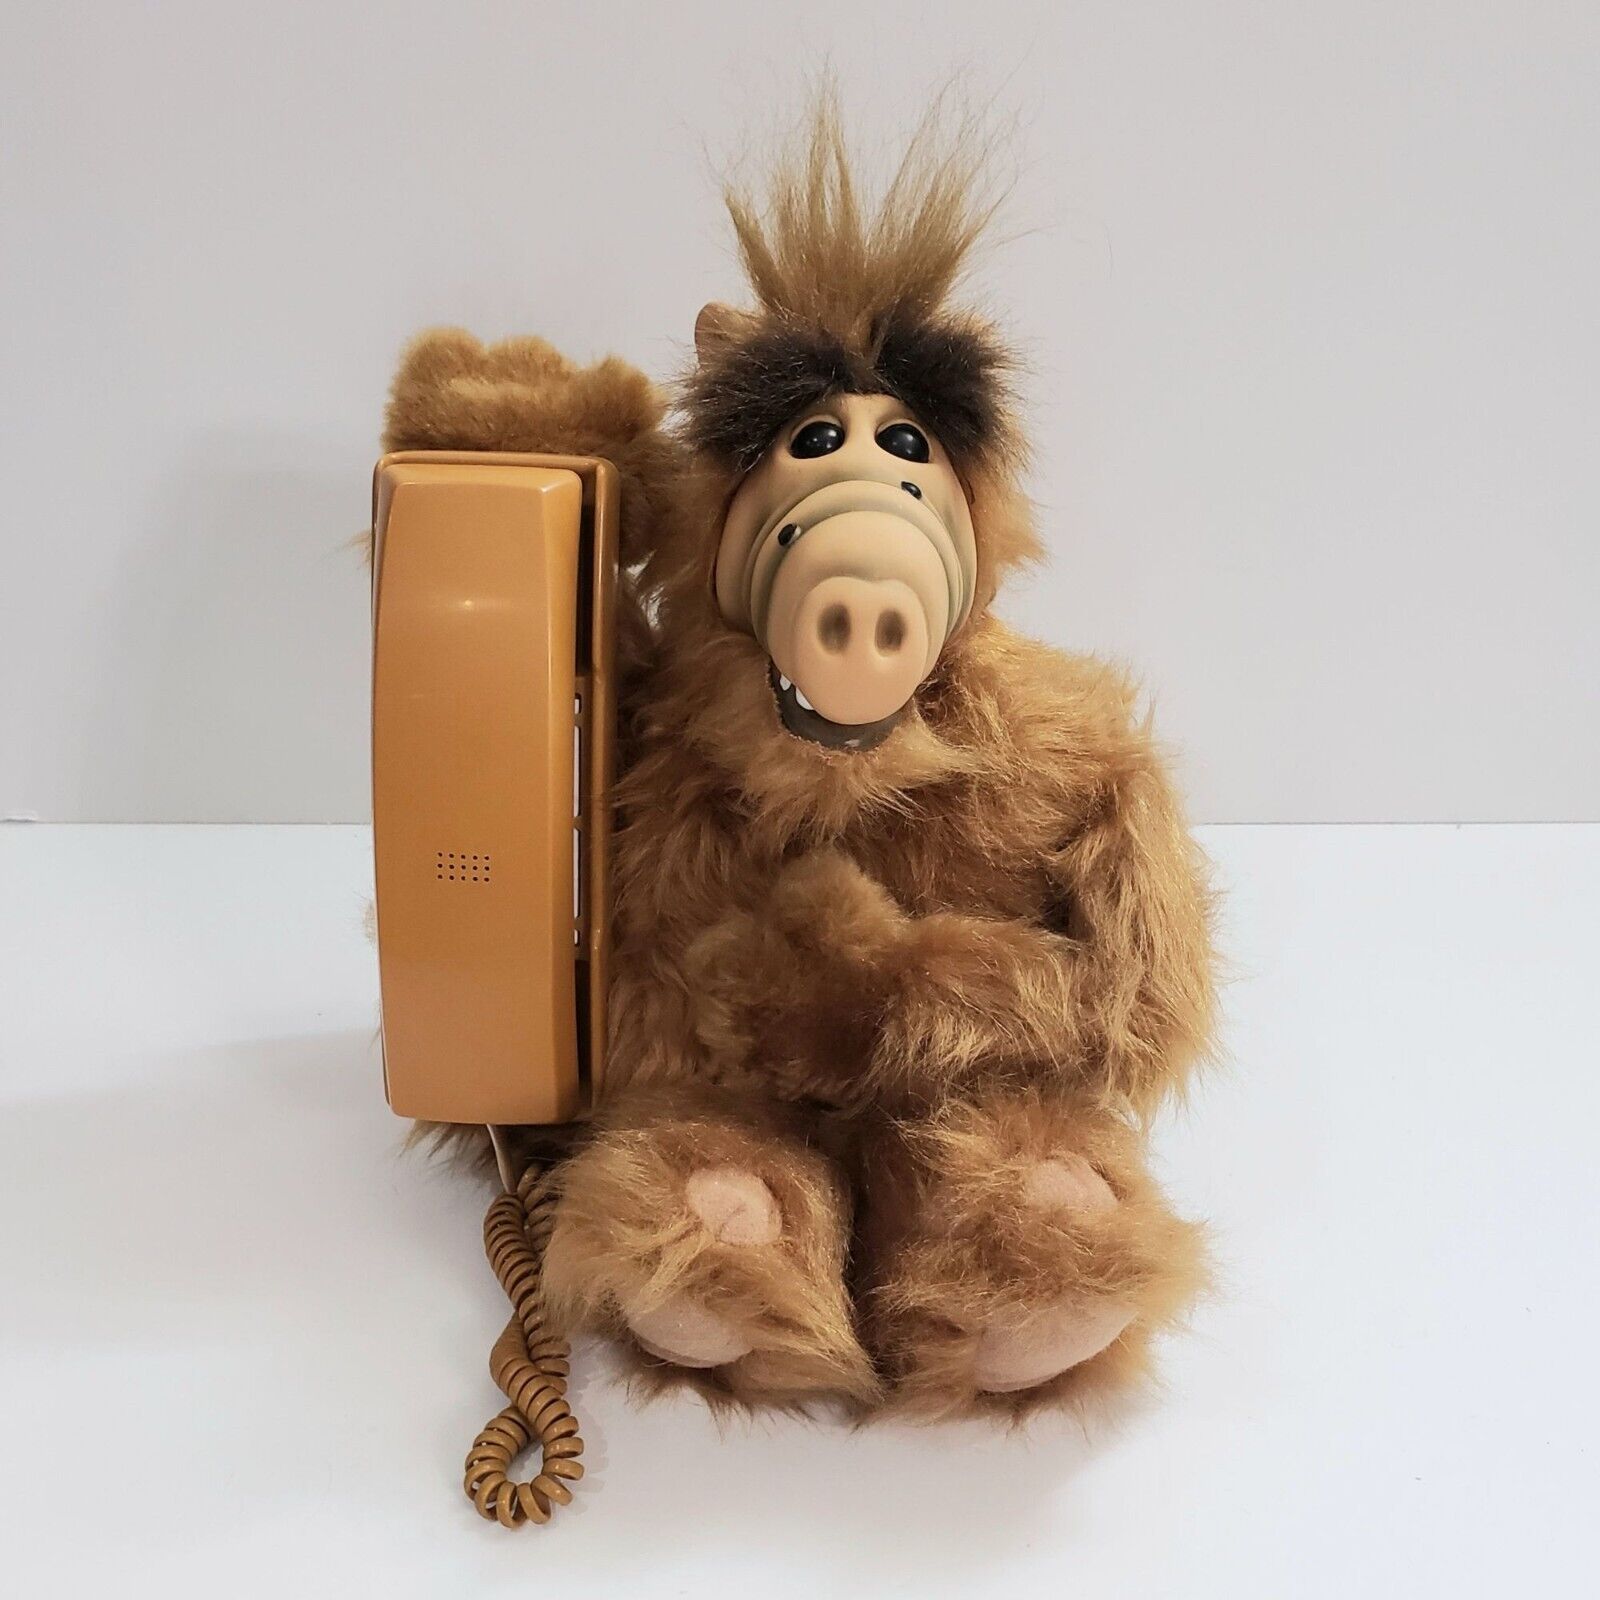 THE ALF PHONE 1988 Plush Corded Push Button Telephone #618S Alien Productions